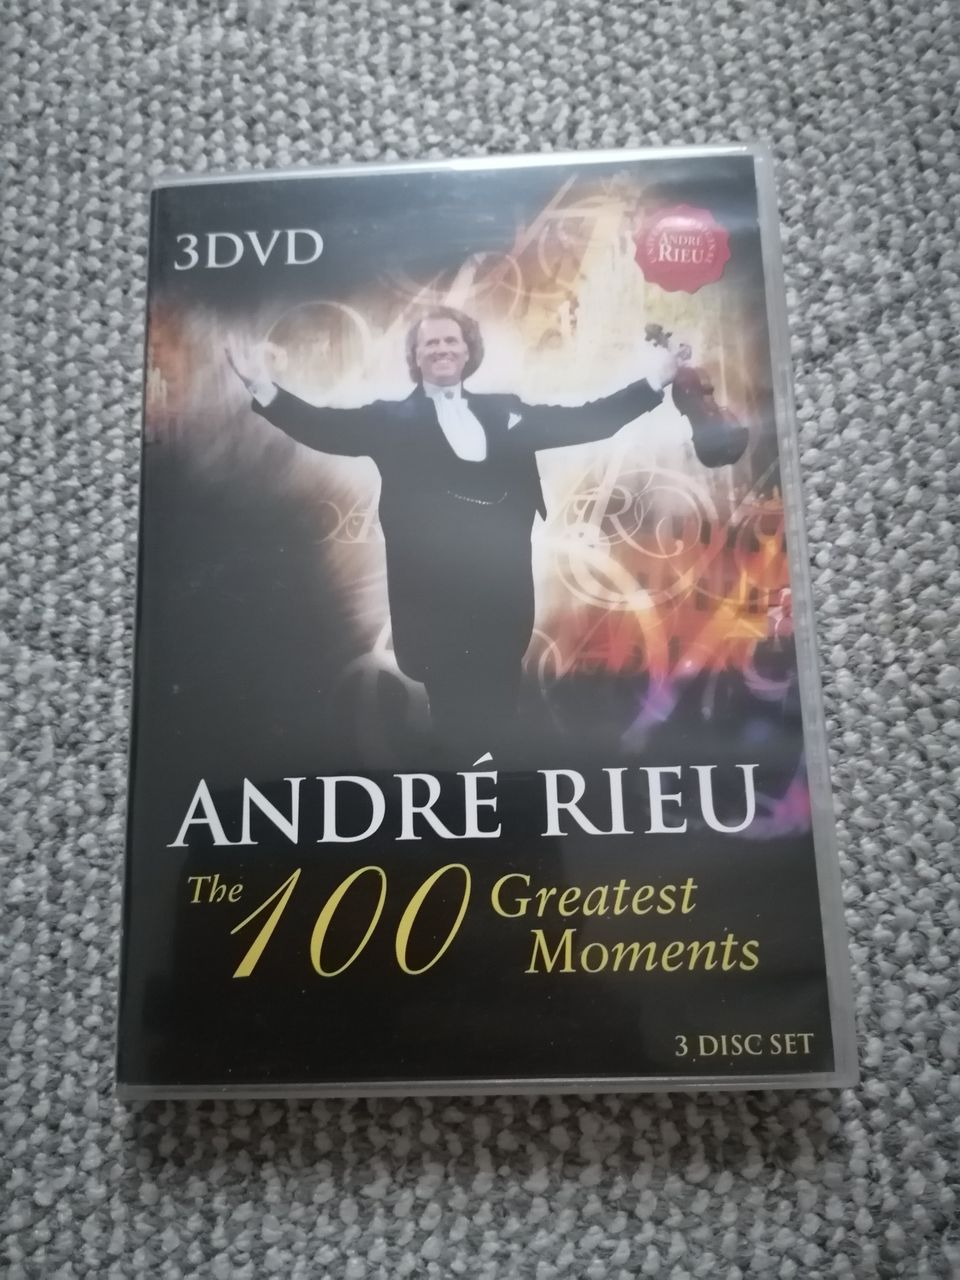 Andre Rieu - The 100 Greatest Moments